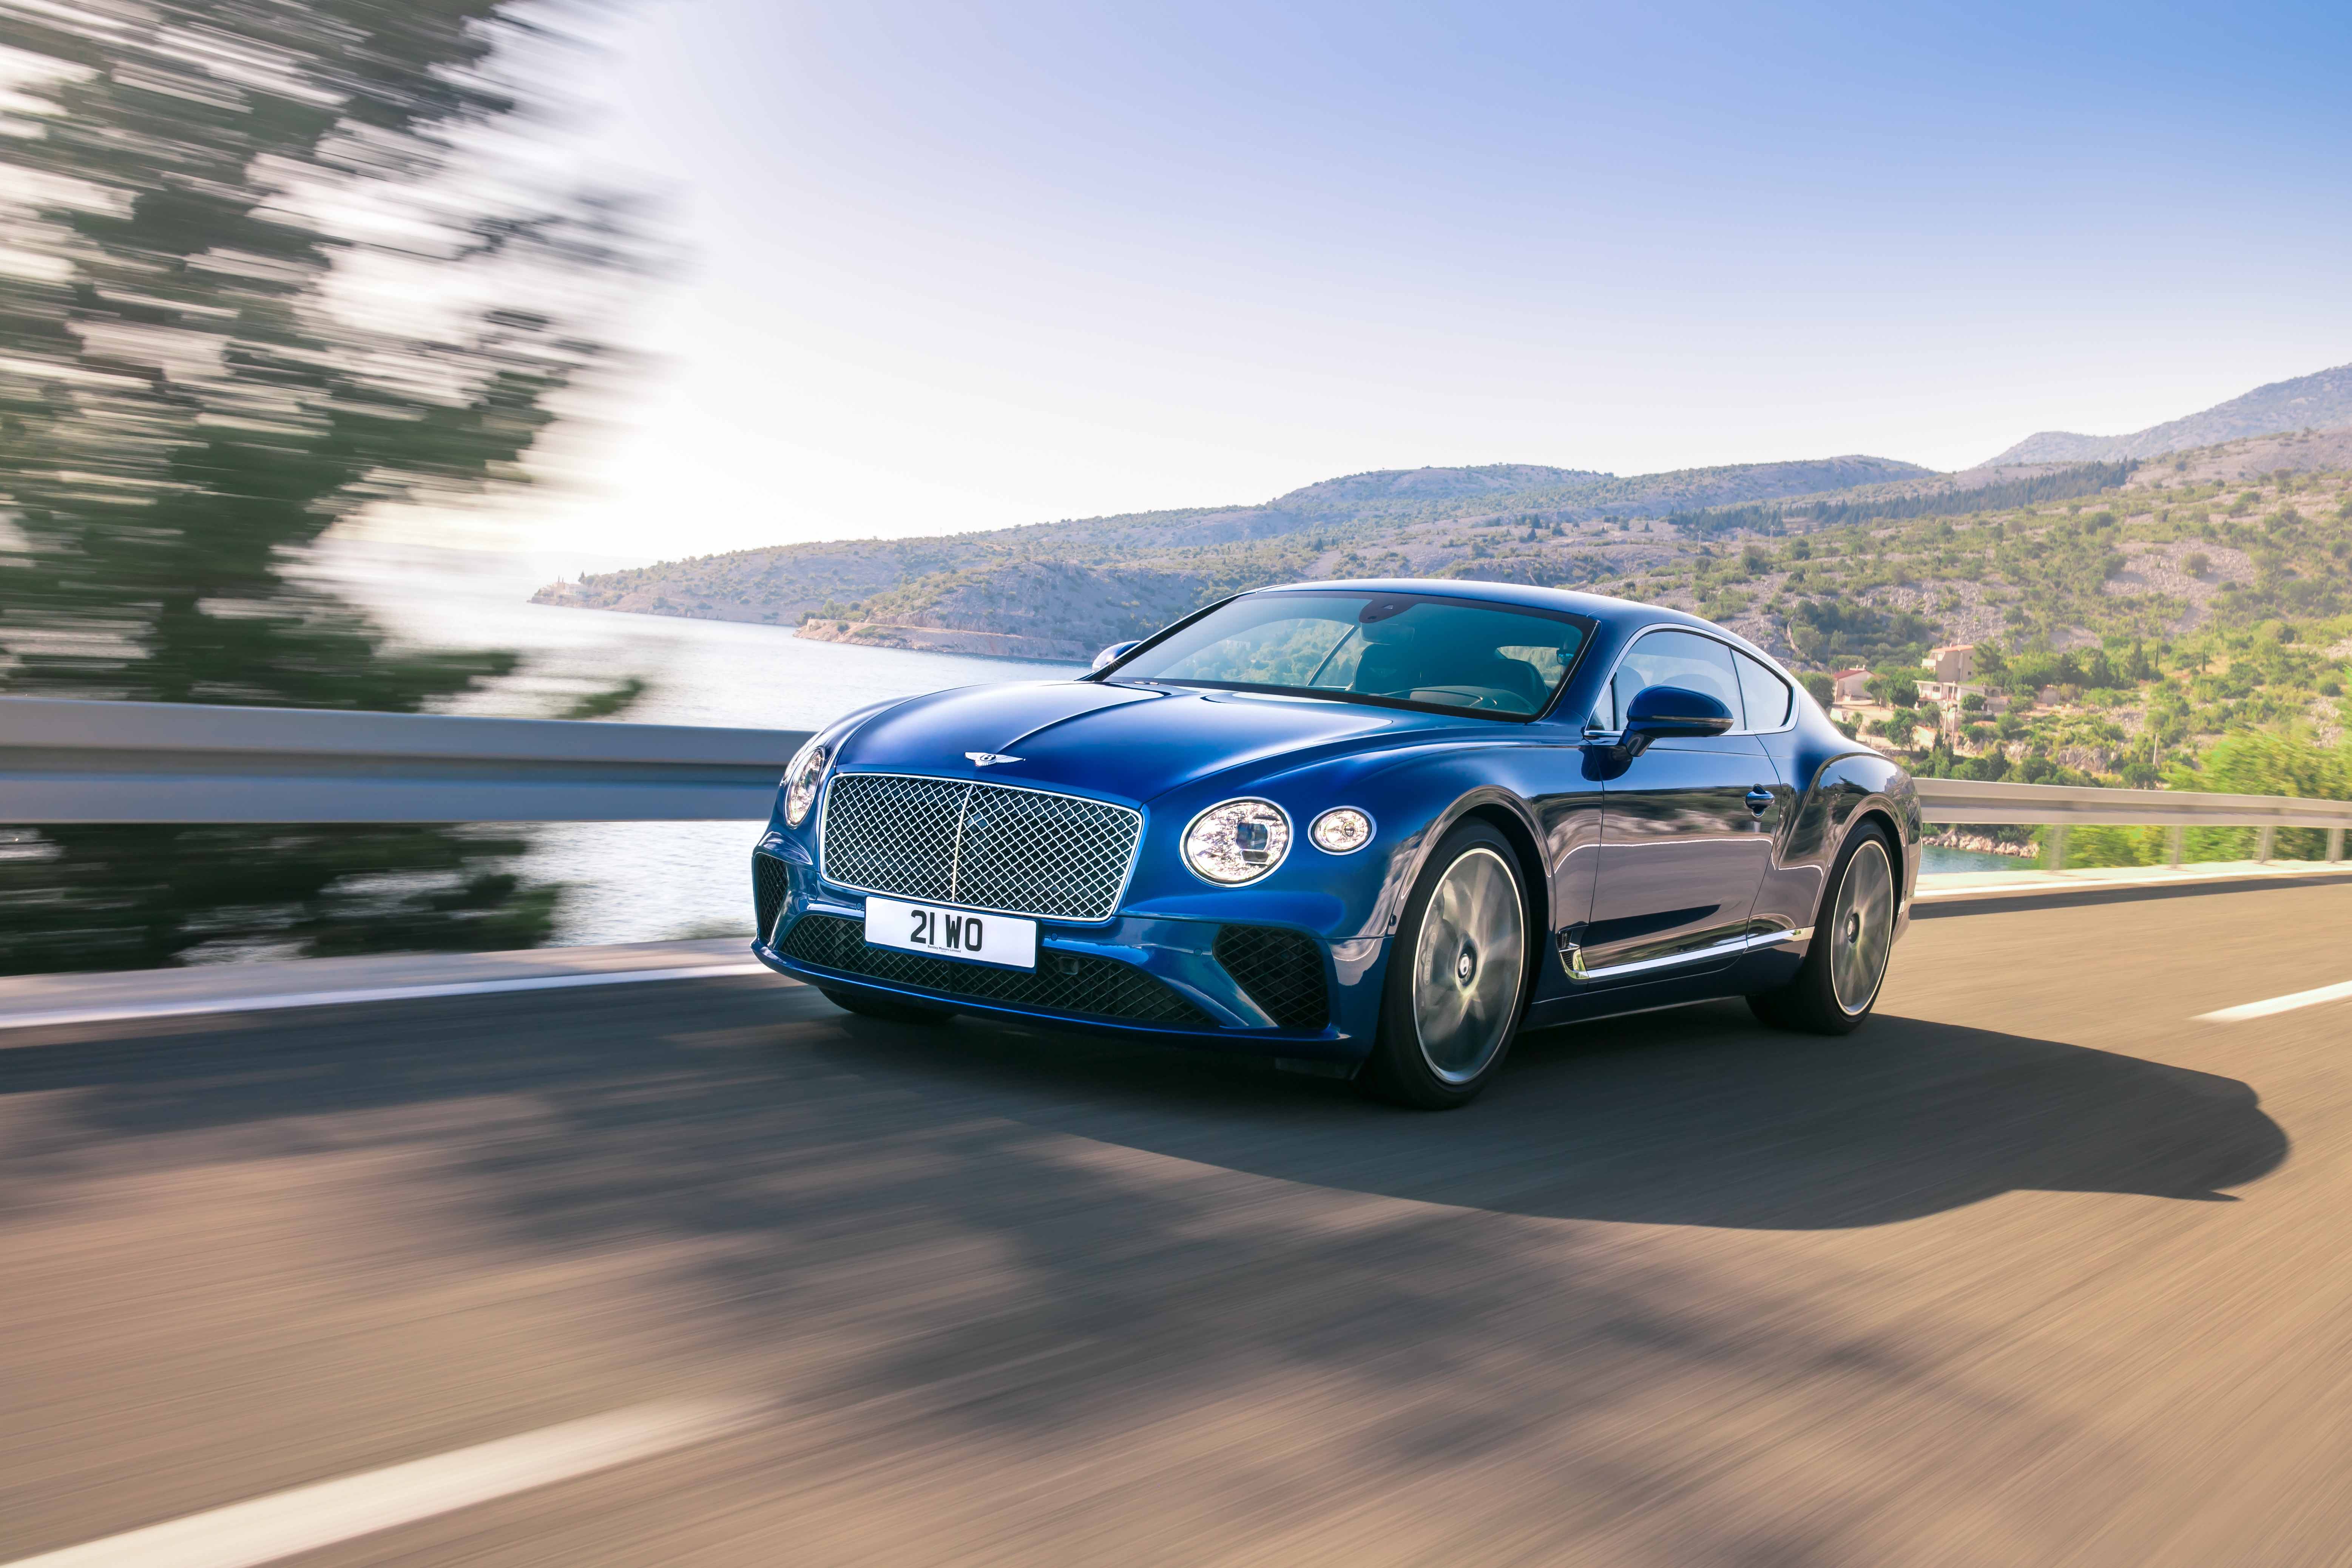 2018 Bentley Continental Revealed